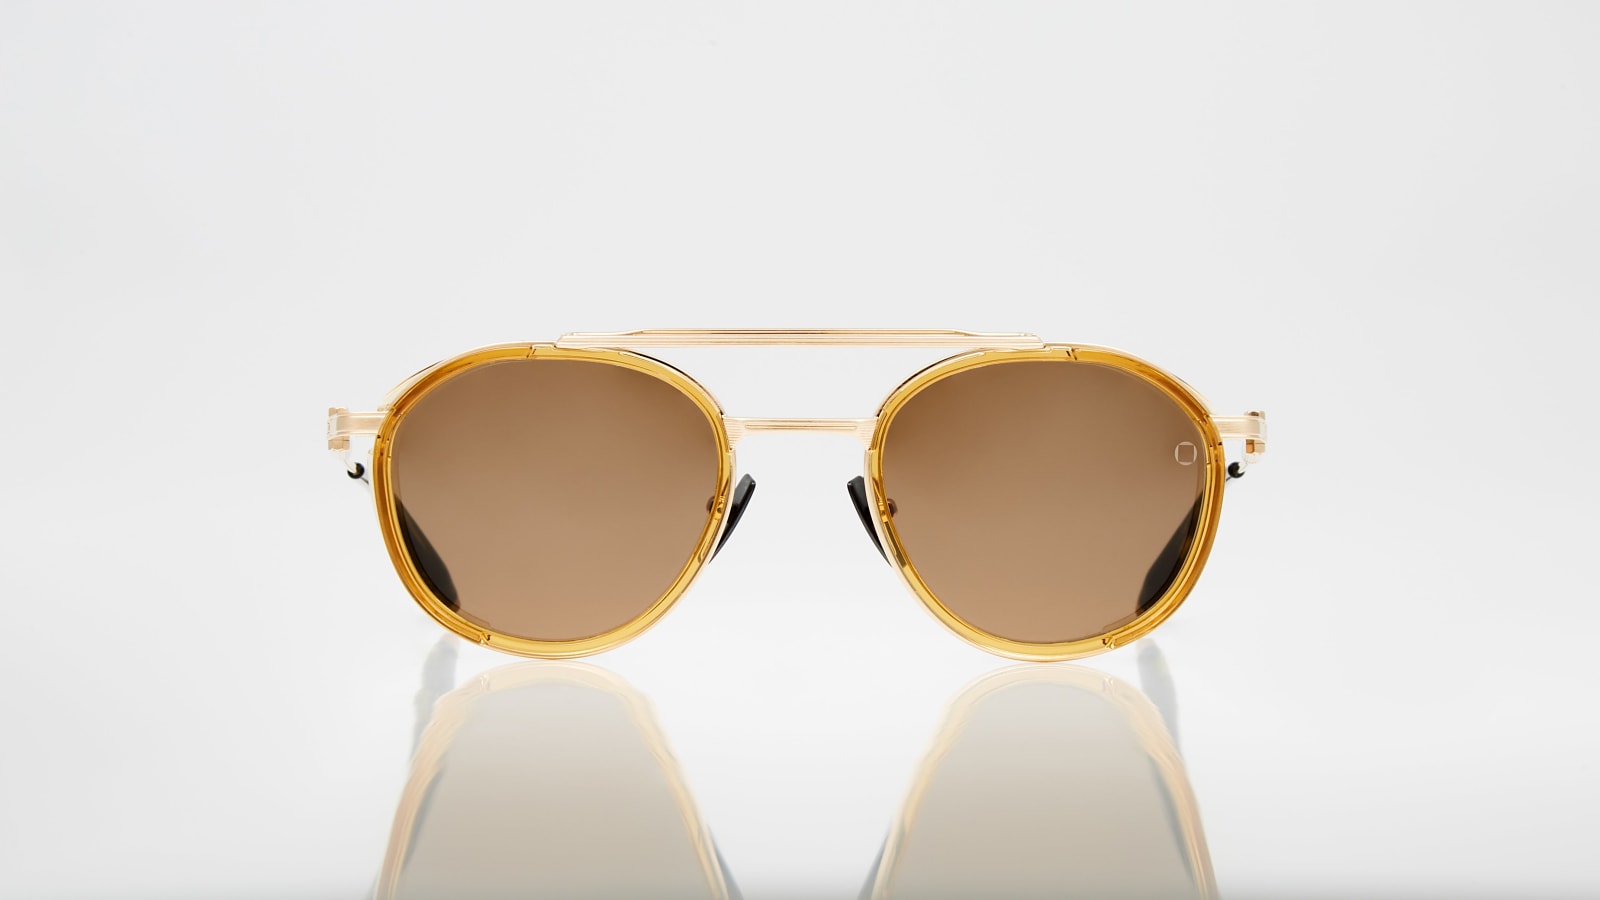 Akoni Sky Mapper - Brushed White Gold & Crystal Amber & Dark Brown - 51 Sunglasses In #valore!